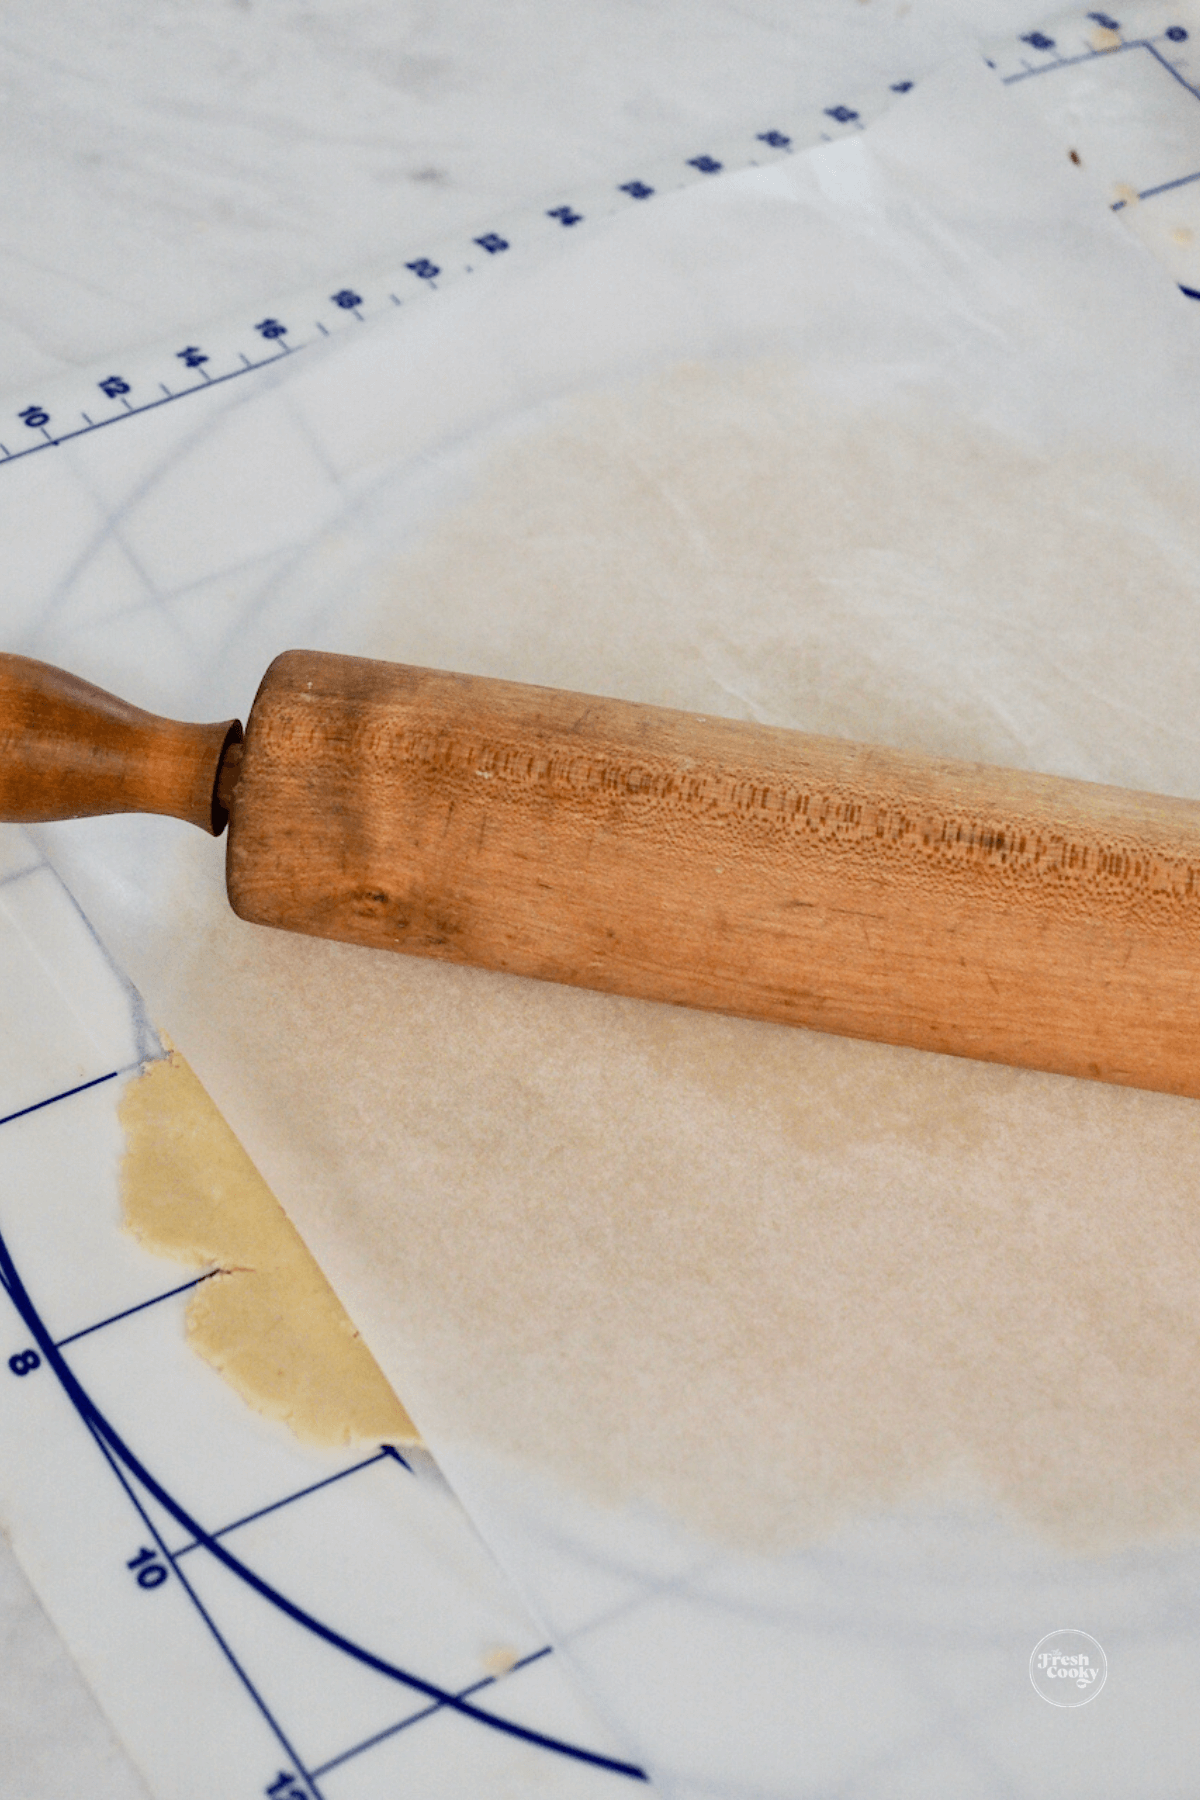 Roll out dough between parchment and measure.